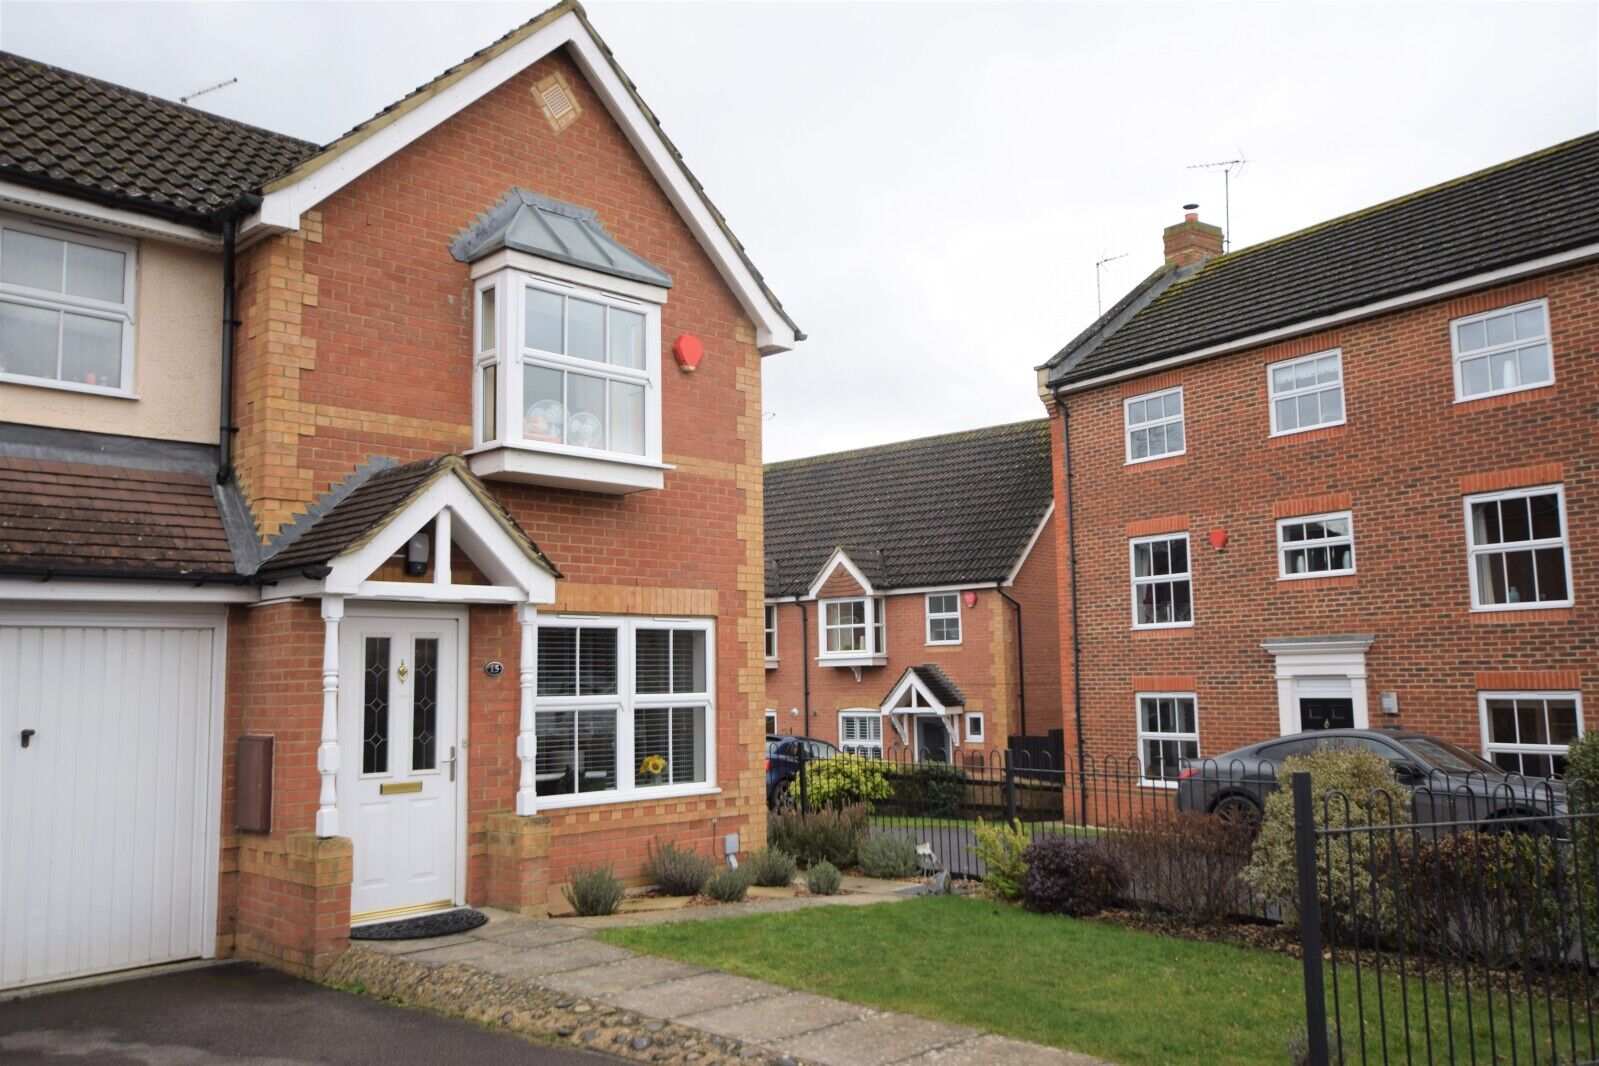 3 bedroom semi detached house to rent, Available from 06/05/2024 Bushell Way, Arborfield, RG2, main image